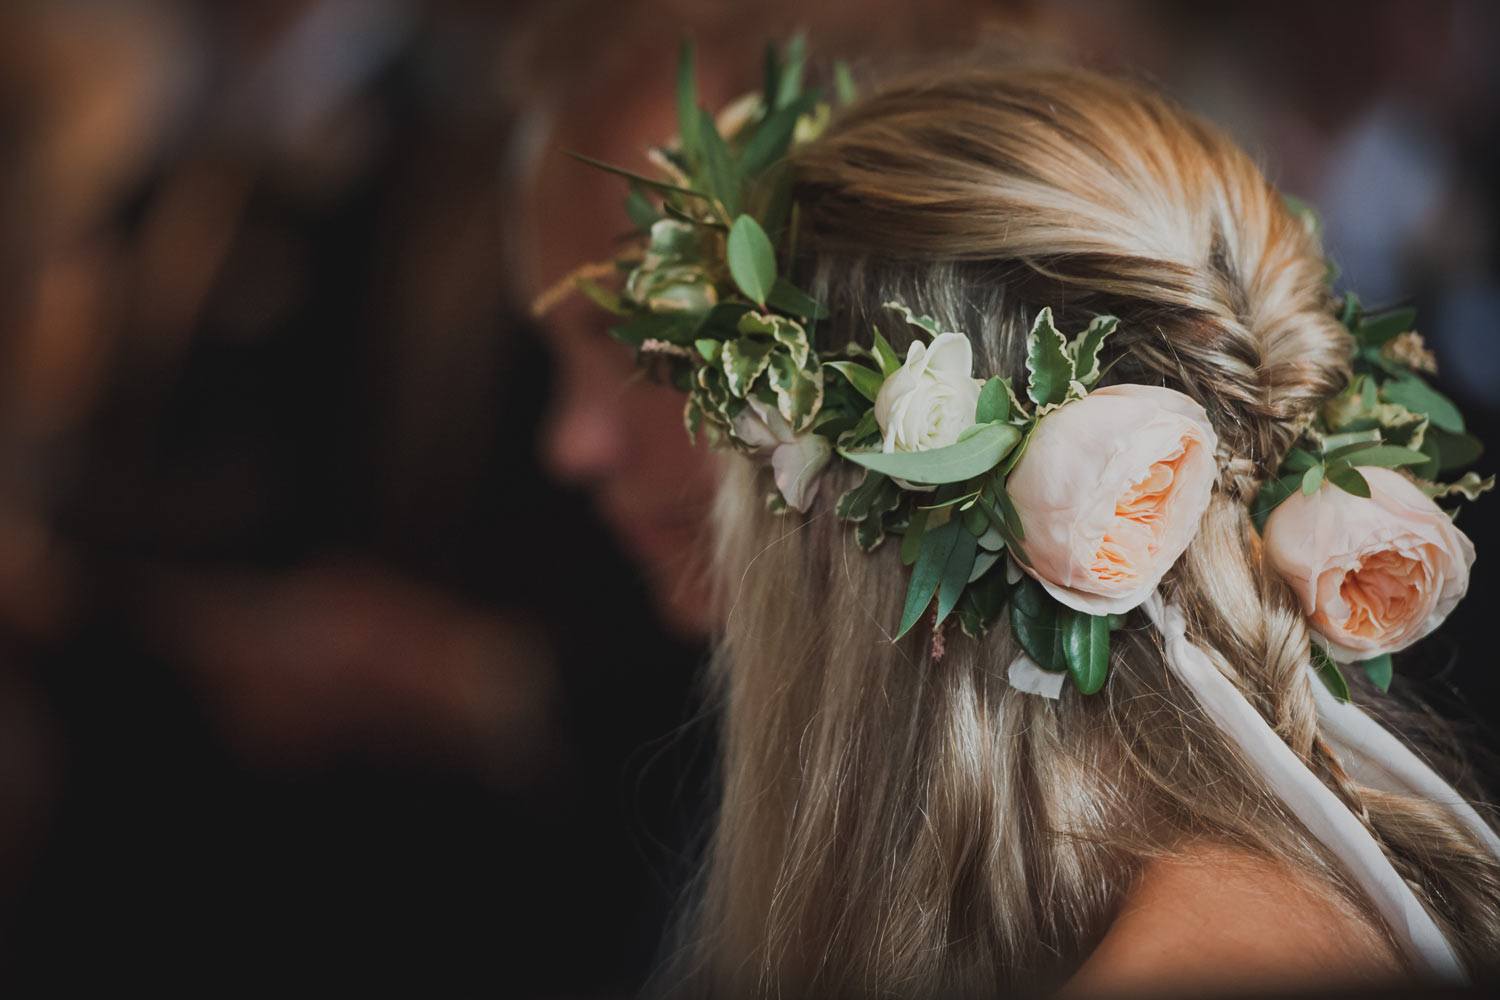 Bridal flower crown with peach garden roses